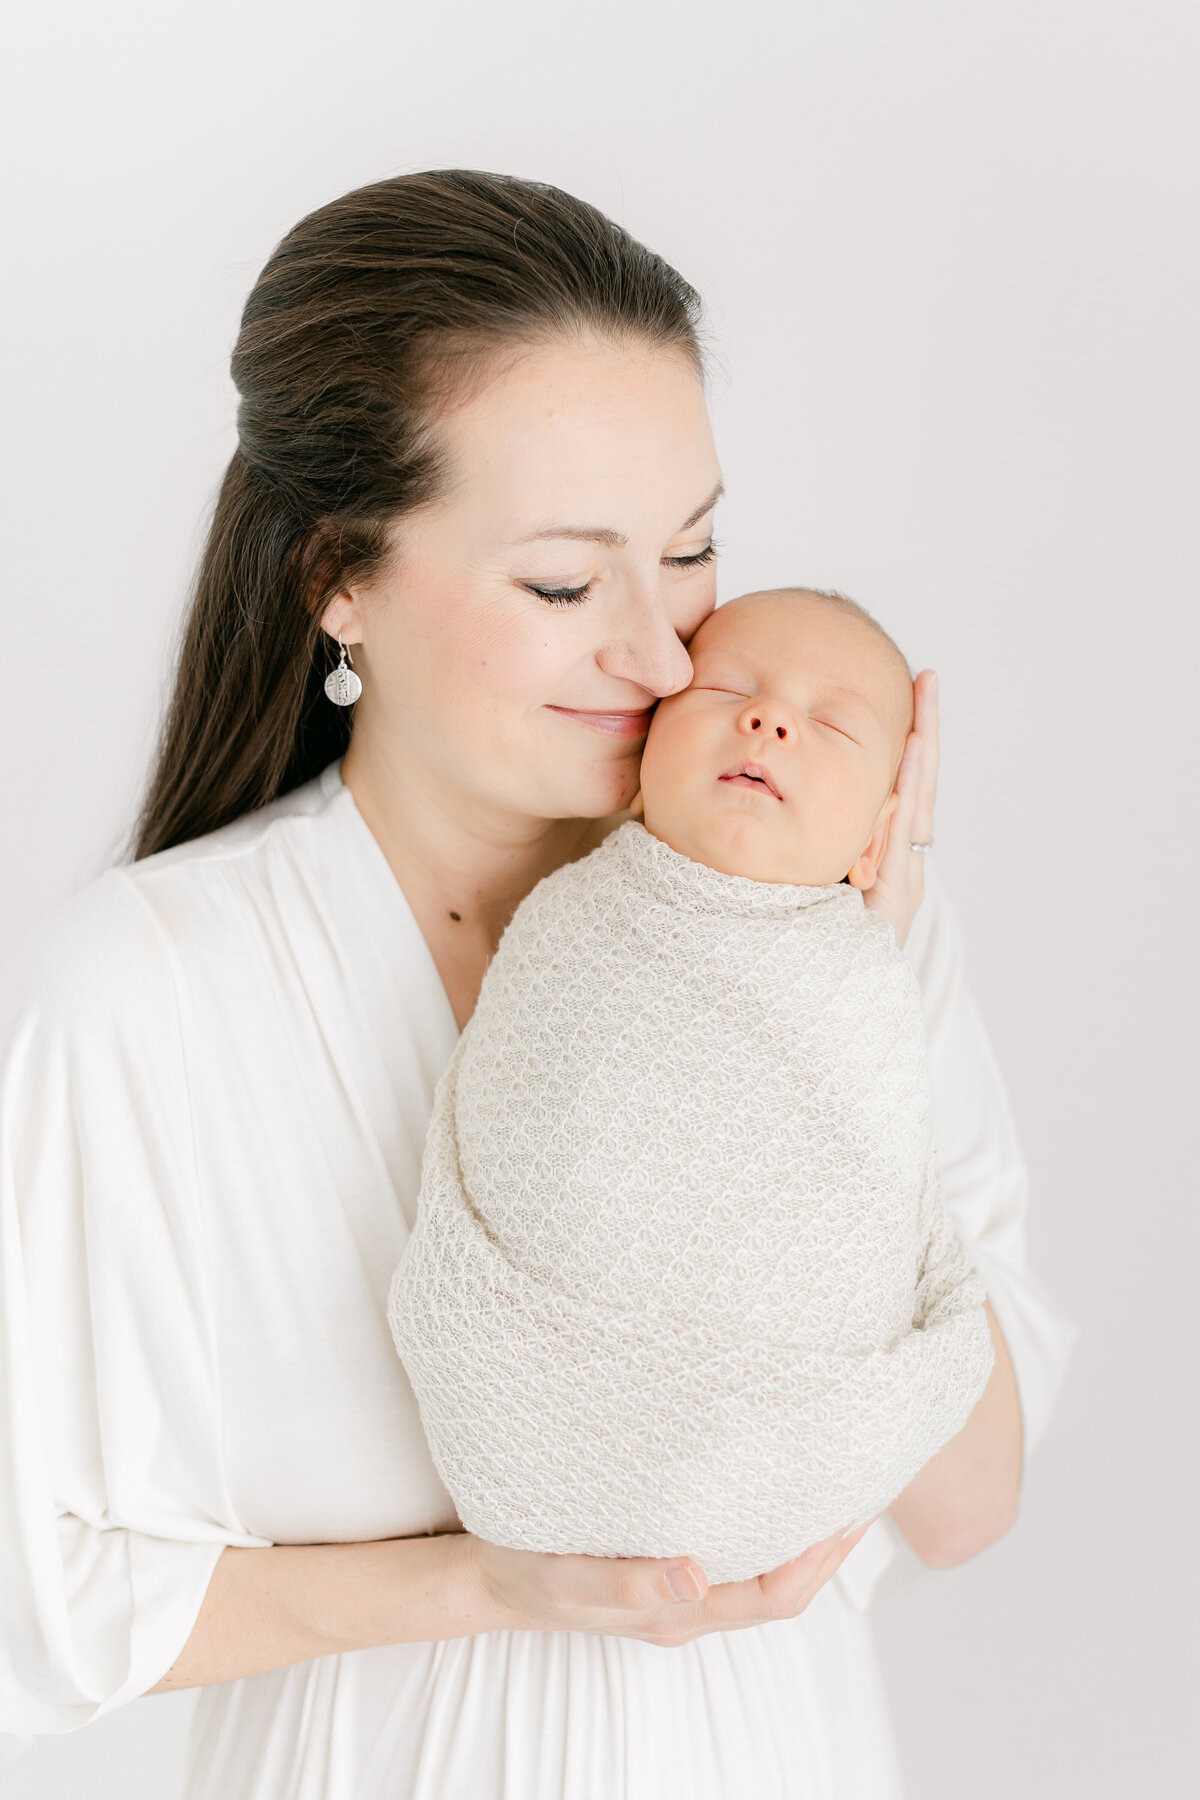 A mother snuggling her baby boy wearing a beautiful white caftan dress by Virginia Newborn Photographer